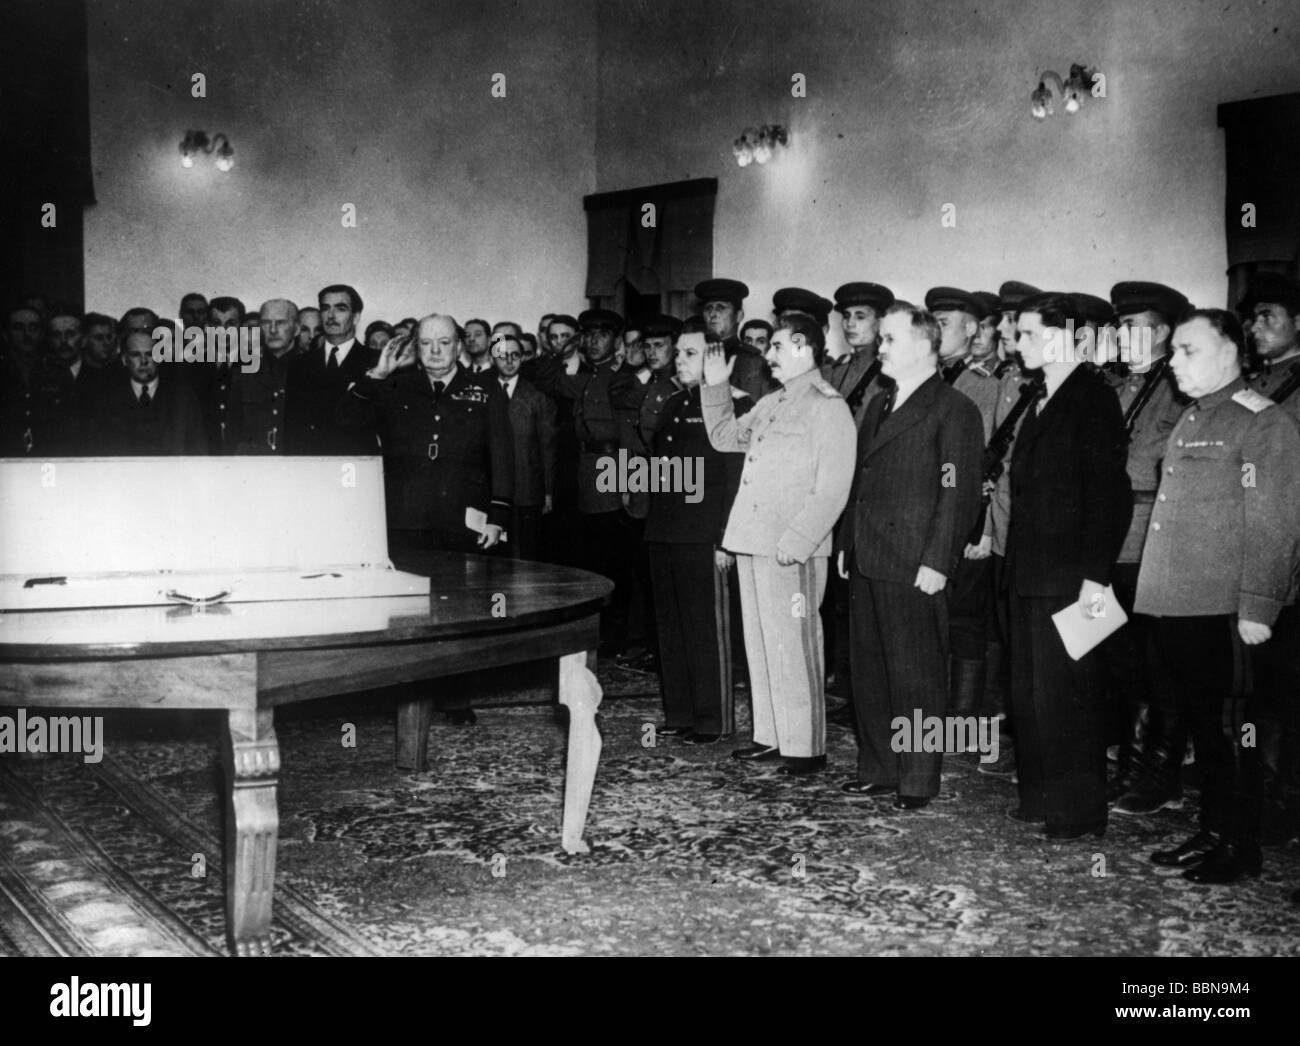 events, Second World War / WWII, conferences, Tehran Conference, 28.11.1943 - 1.12.1943, presentation of the "Stalingrad Sword" to the Russians, Winston Churchill and Joseph Stalin during the ceremony, 29.11.1943, Stock Photo